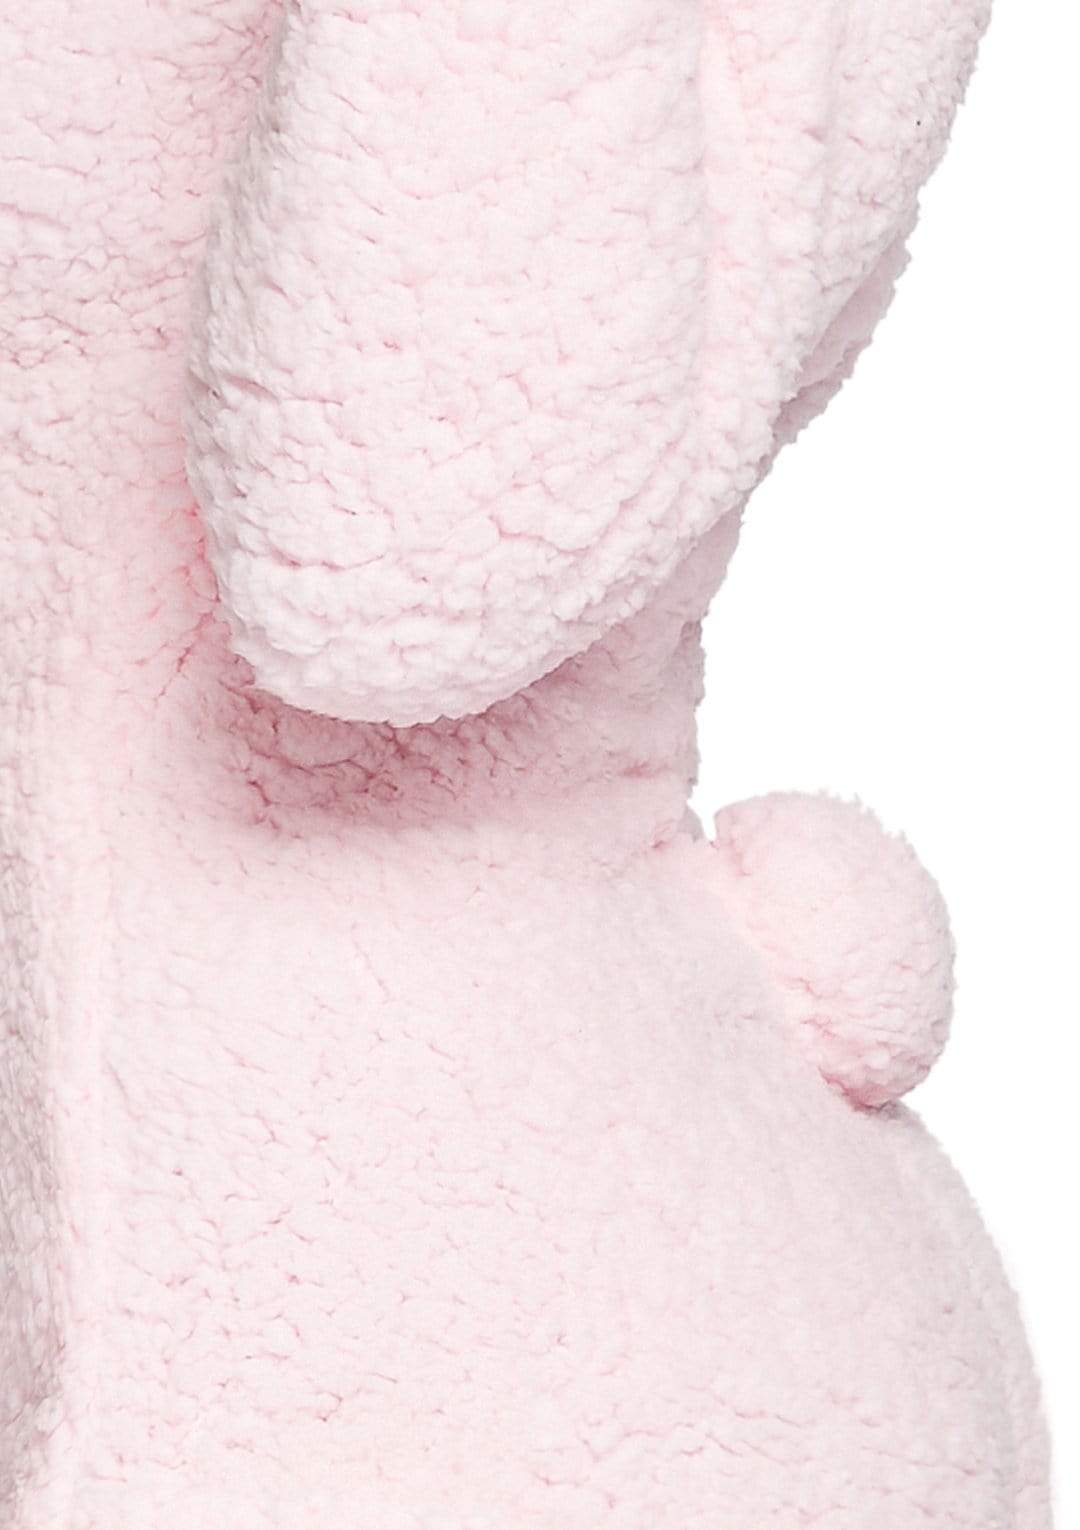 Cuddle Bunny Plush Romper with Attached Tail and Ear Hood